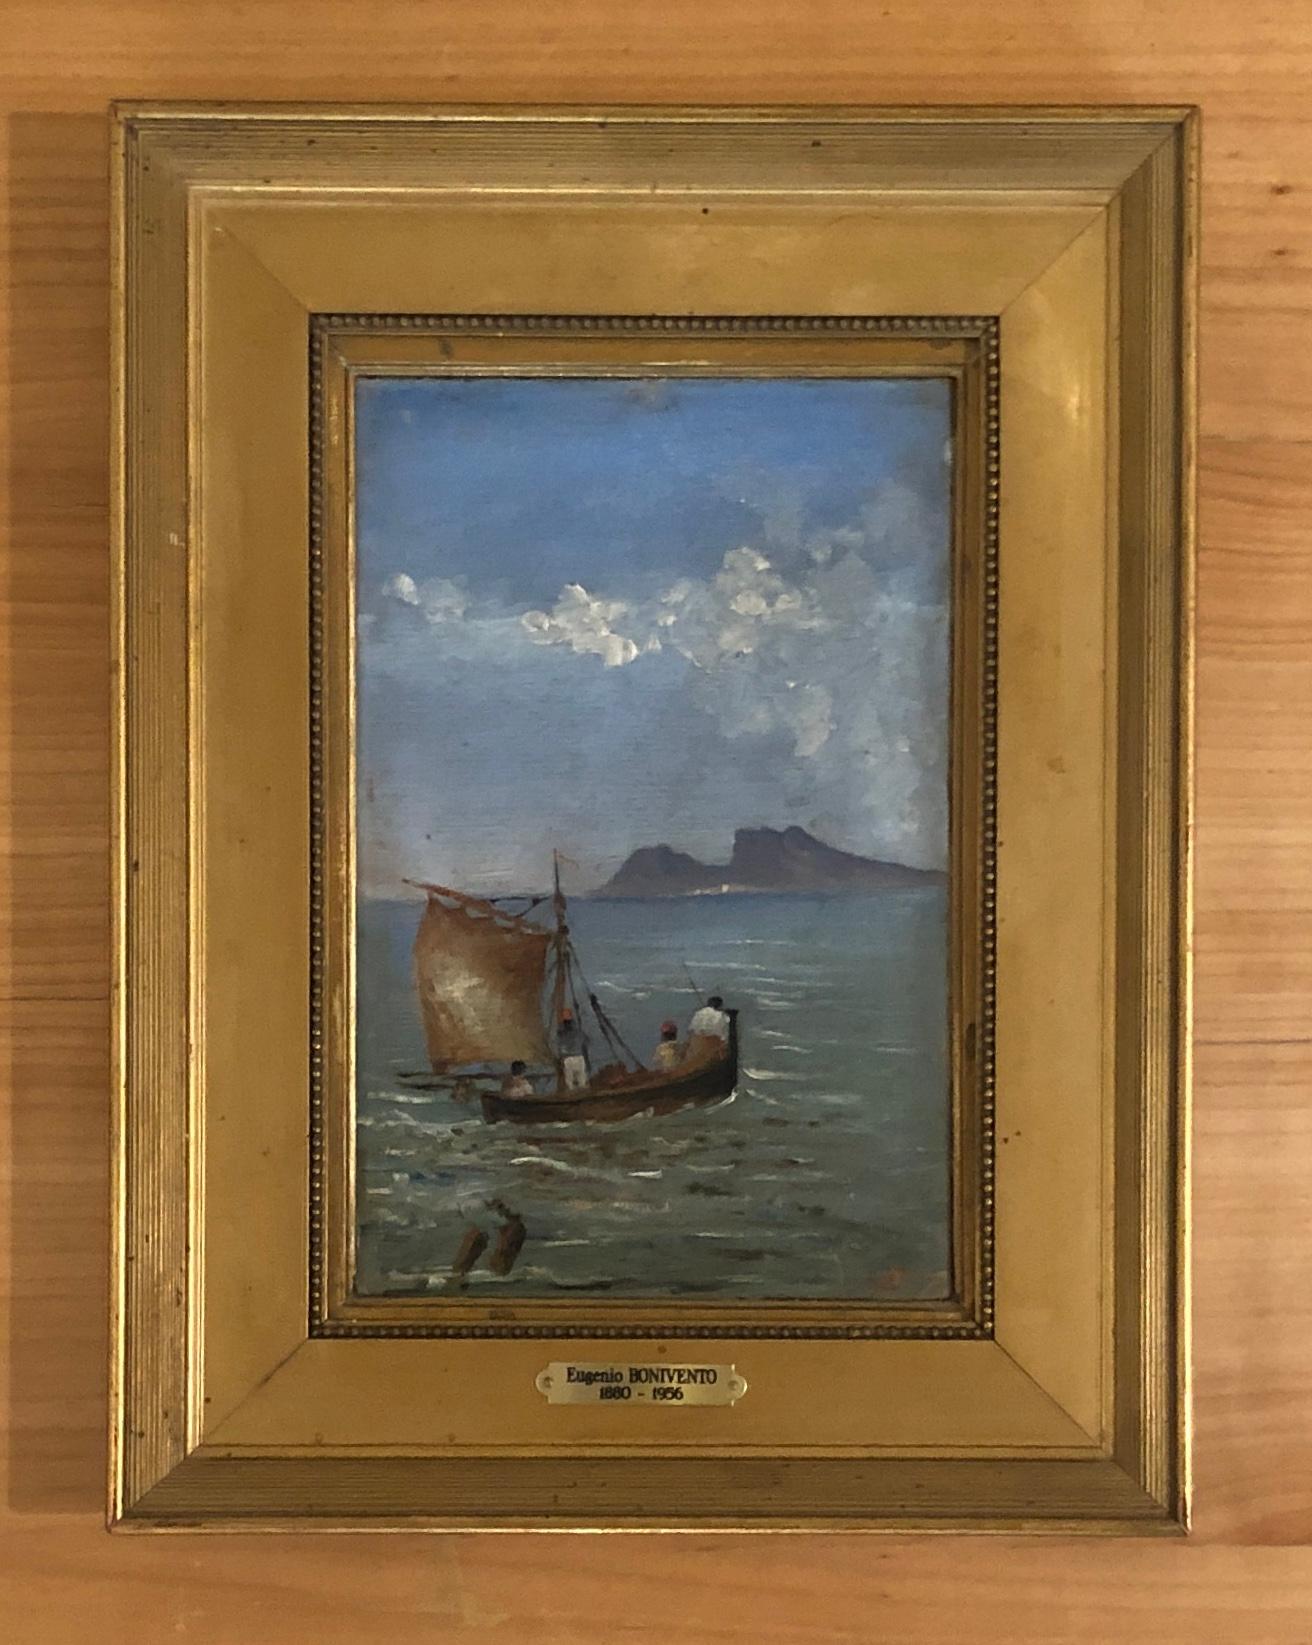 Fishermen in the Gulf of Naples in front of the island of Capri - Painting by Eugenio Bonivento